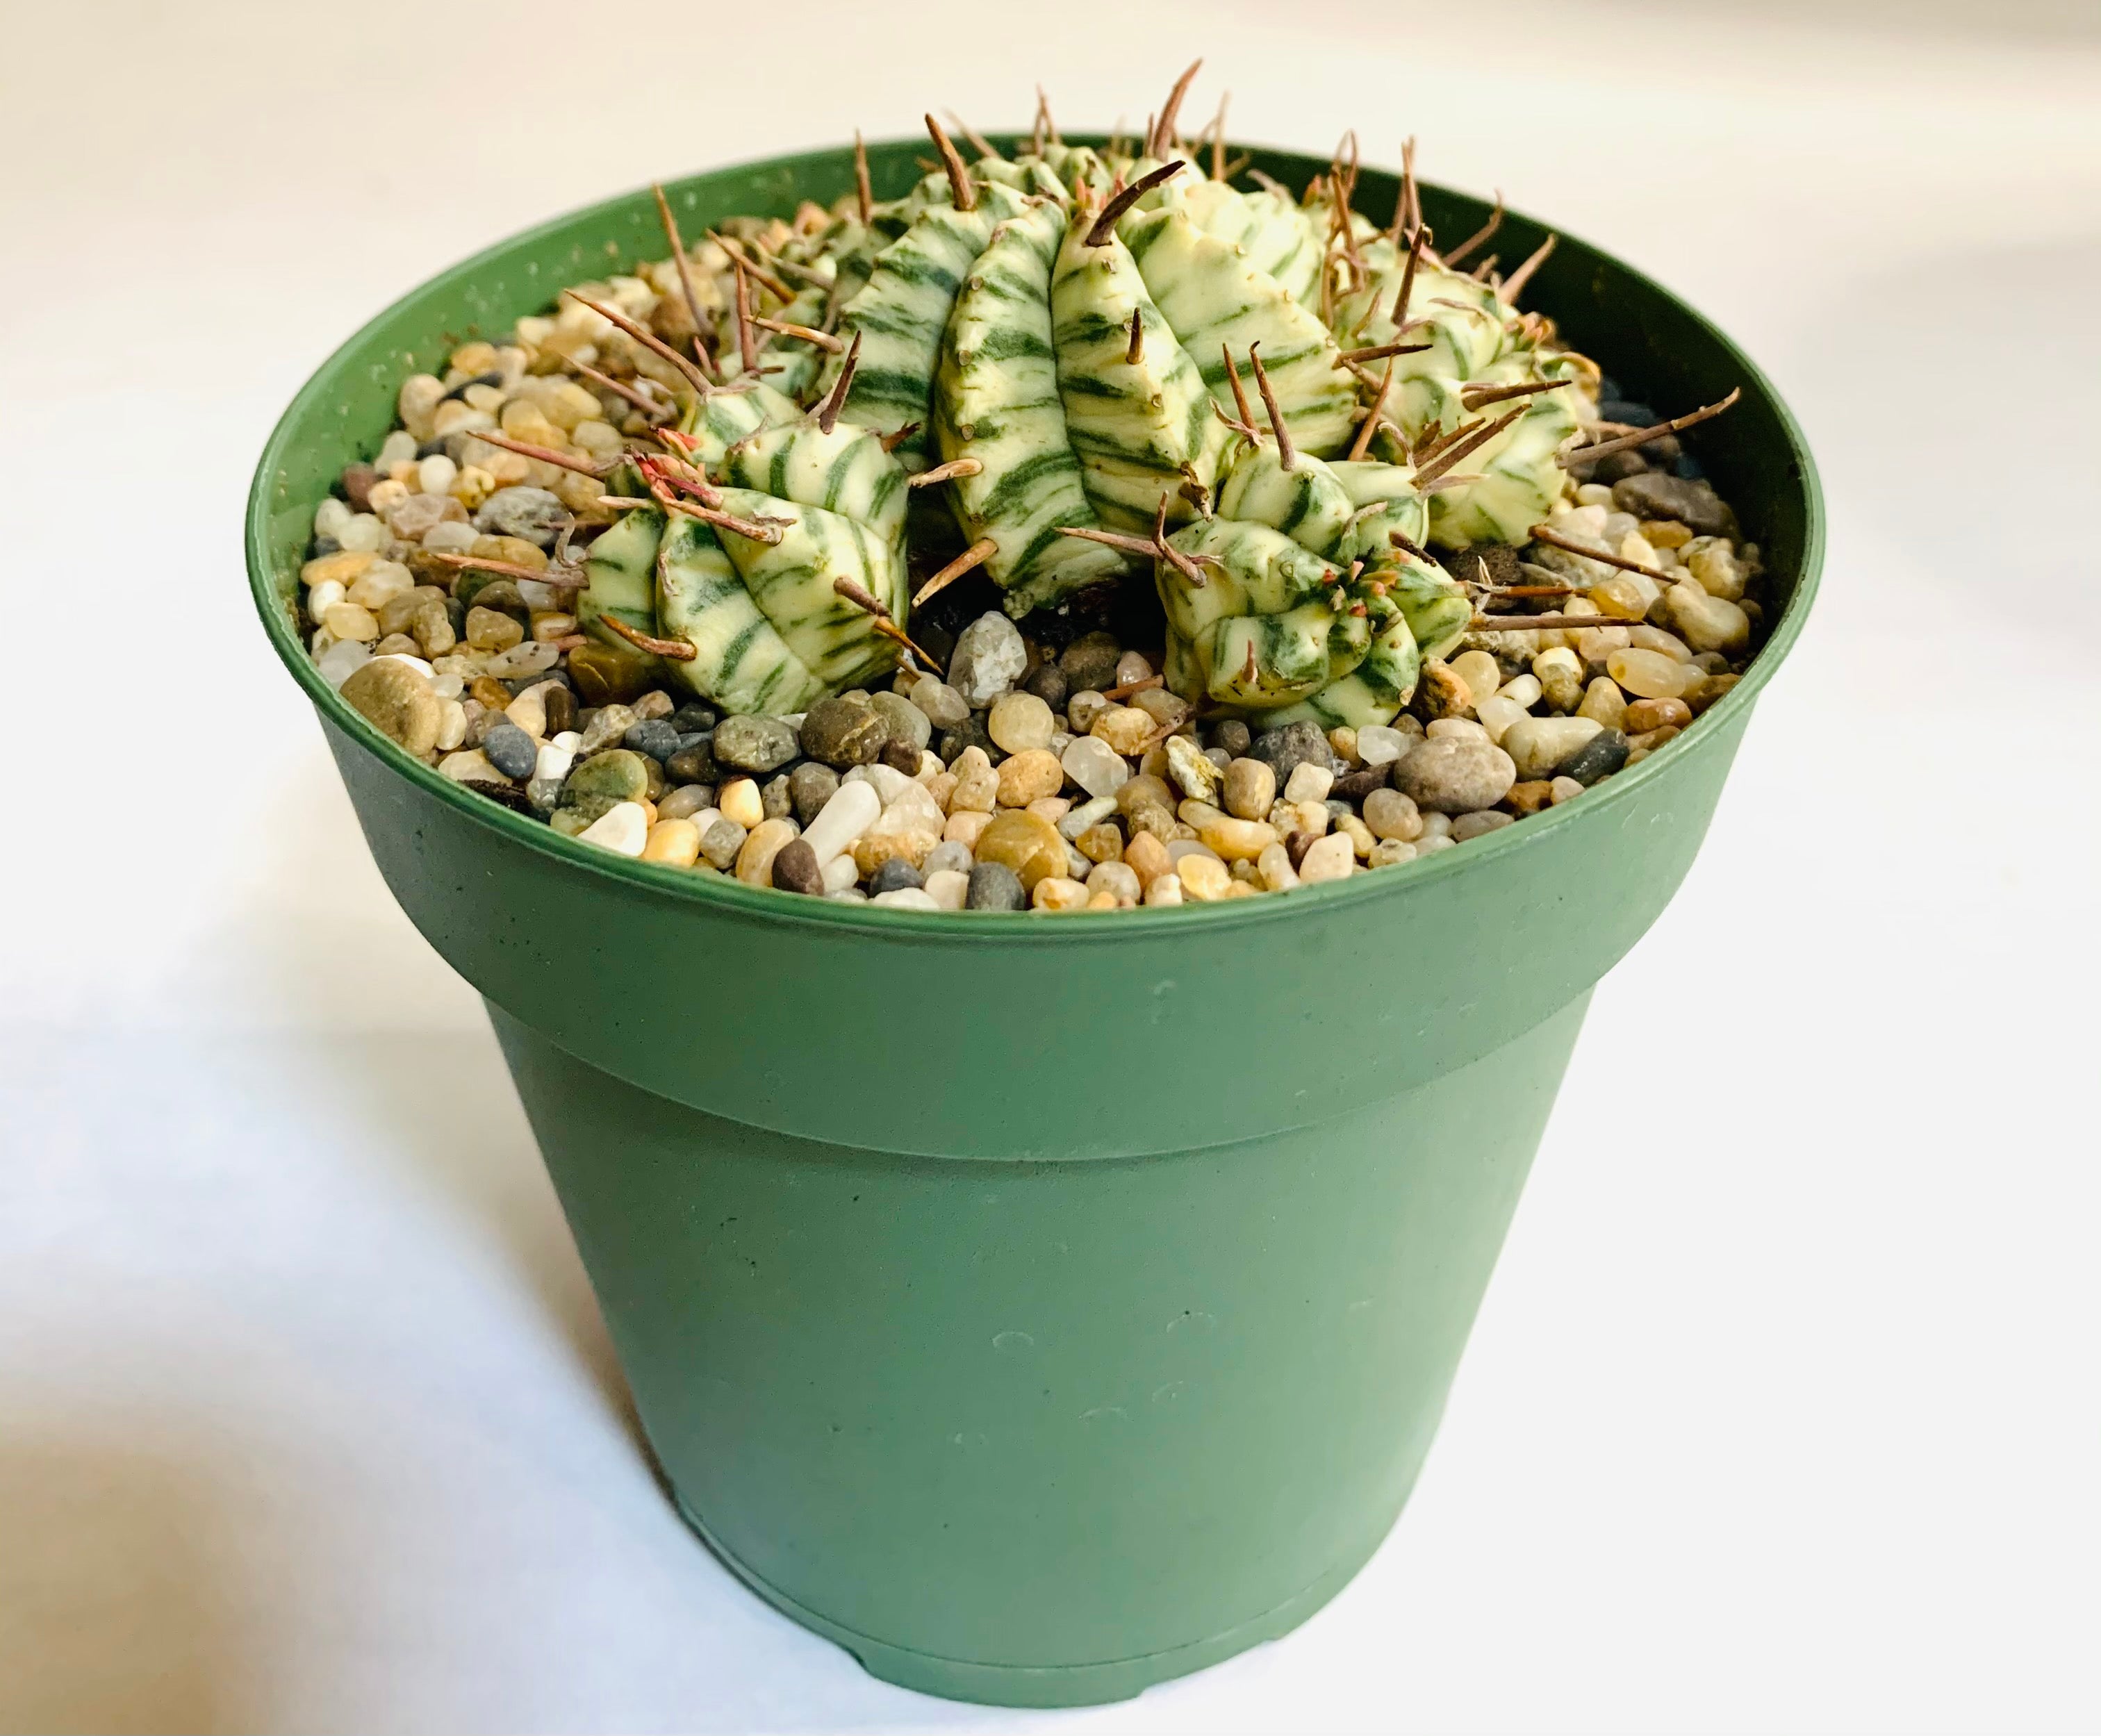 A cactus-like succulent which is spherical in shape. There is a larger main succulent, with multiple smaller pups surrounding it. The succulents have horizontal stripes in creamy yellow and green, with uniform thorns throughout.